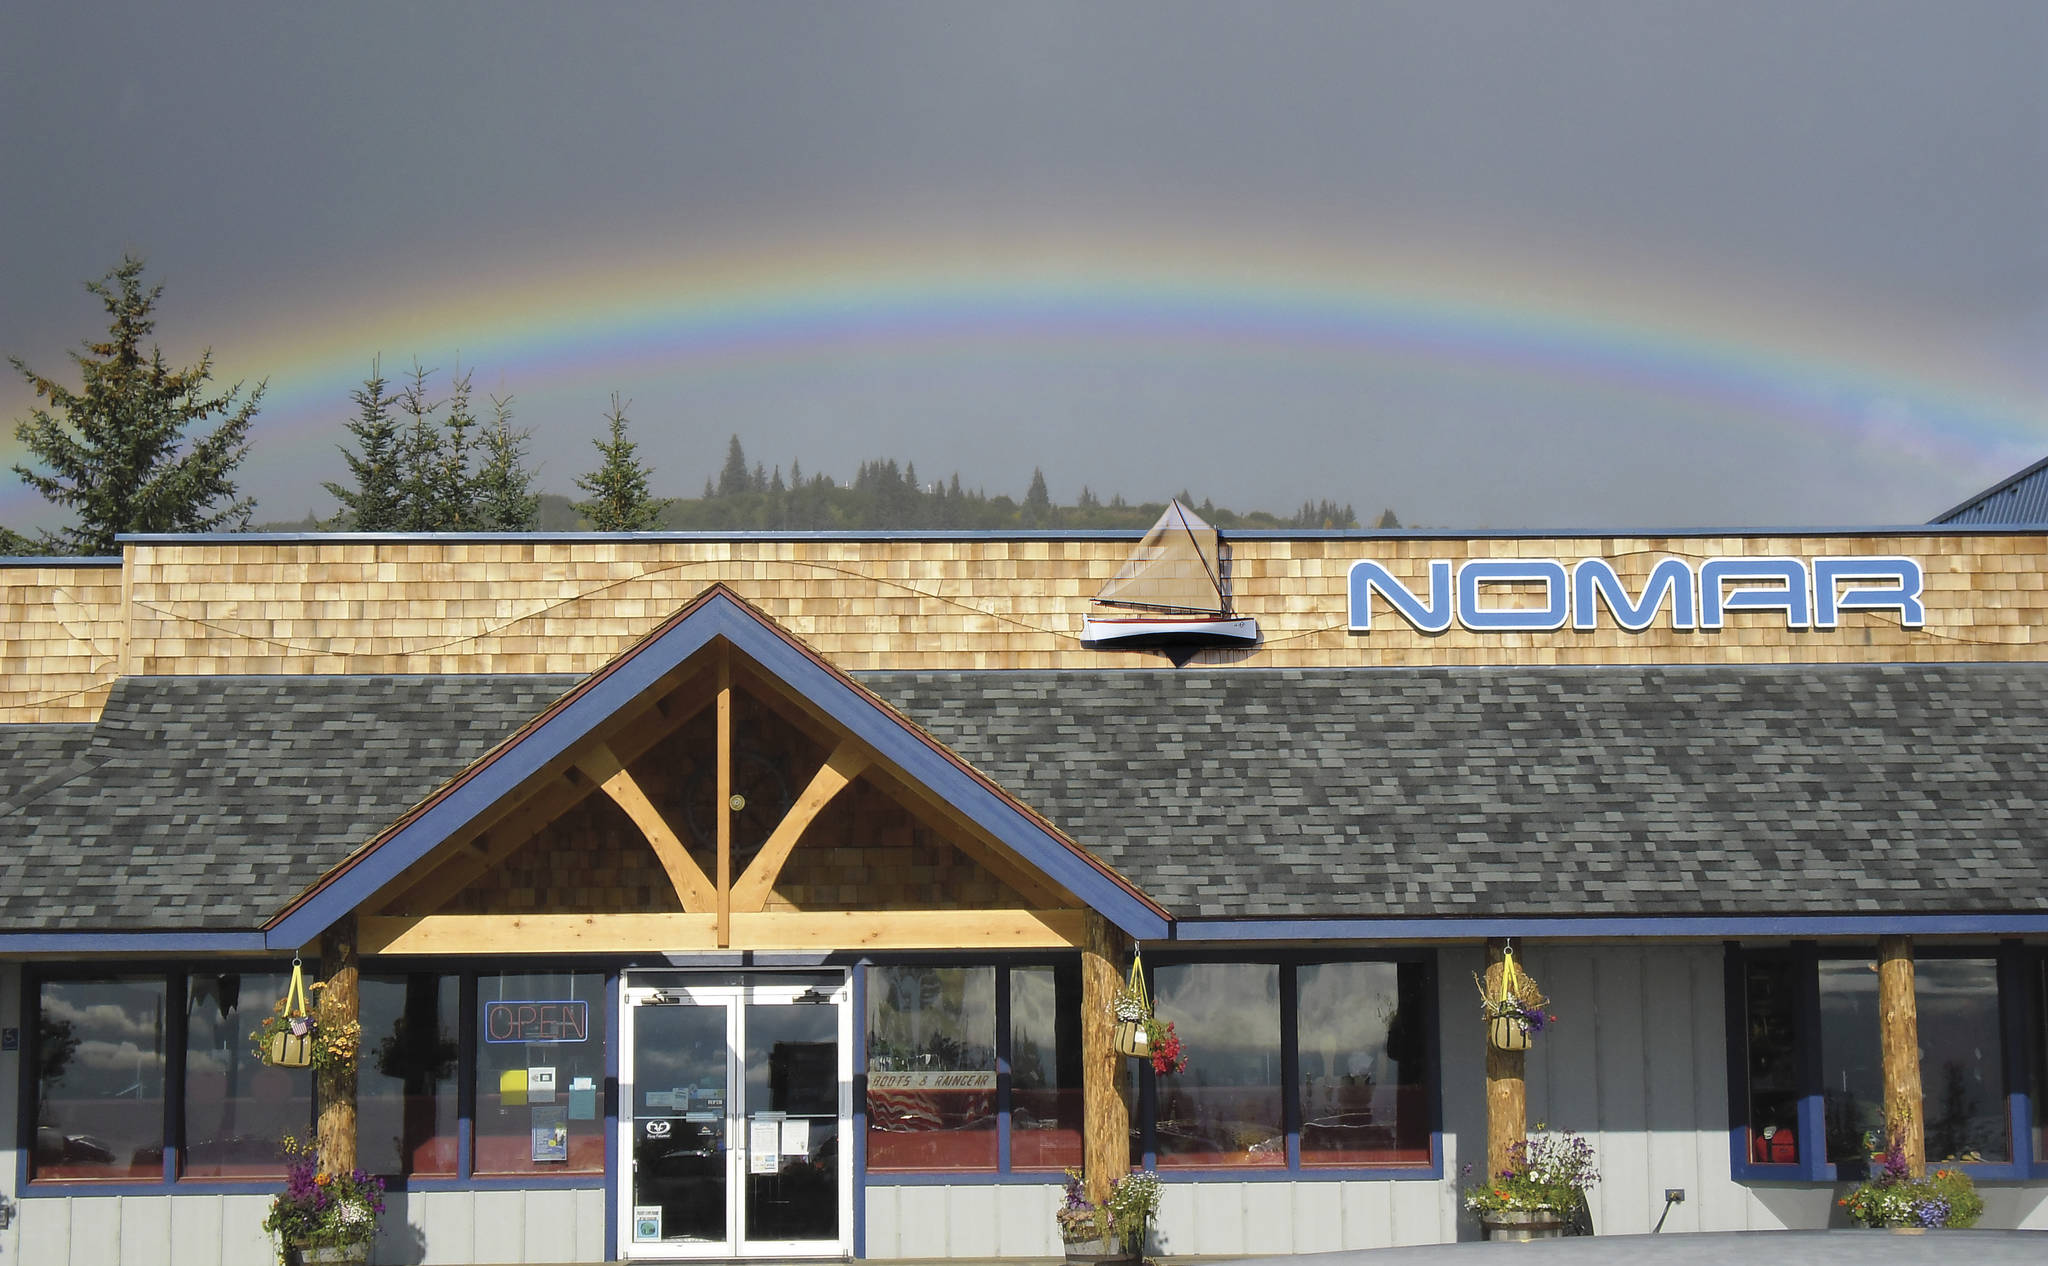 The NOMAR store at the corner of Pioneer Avenue and Main Street. (Photo provided)